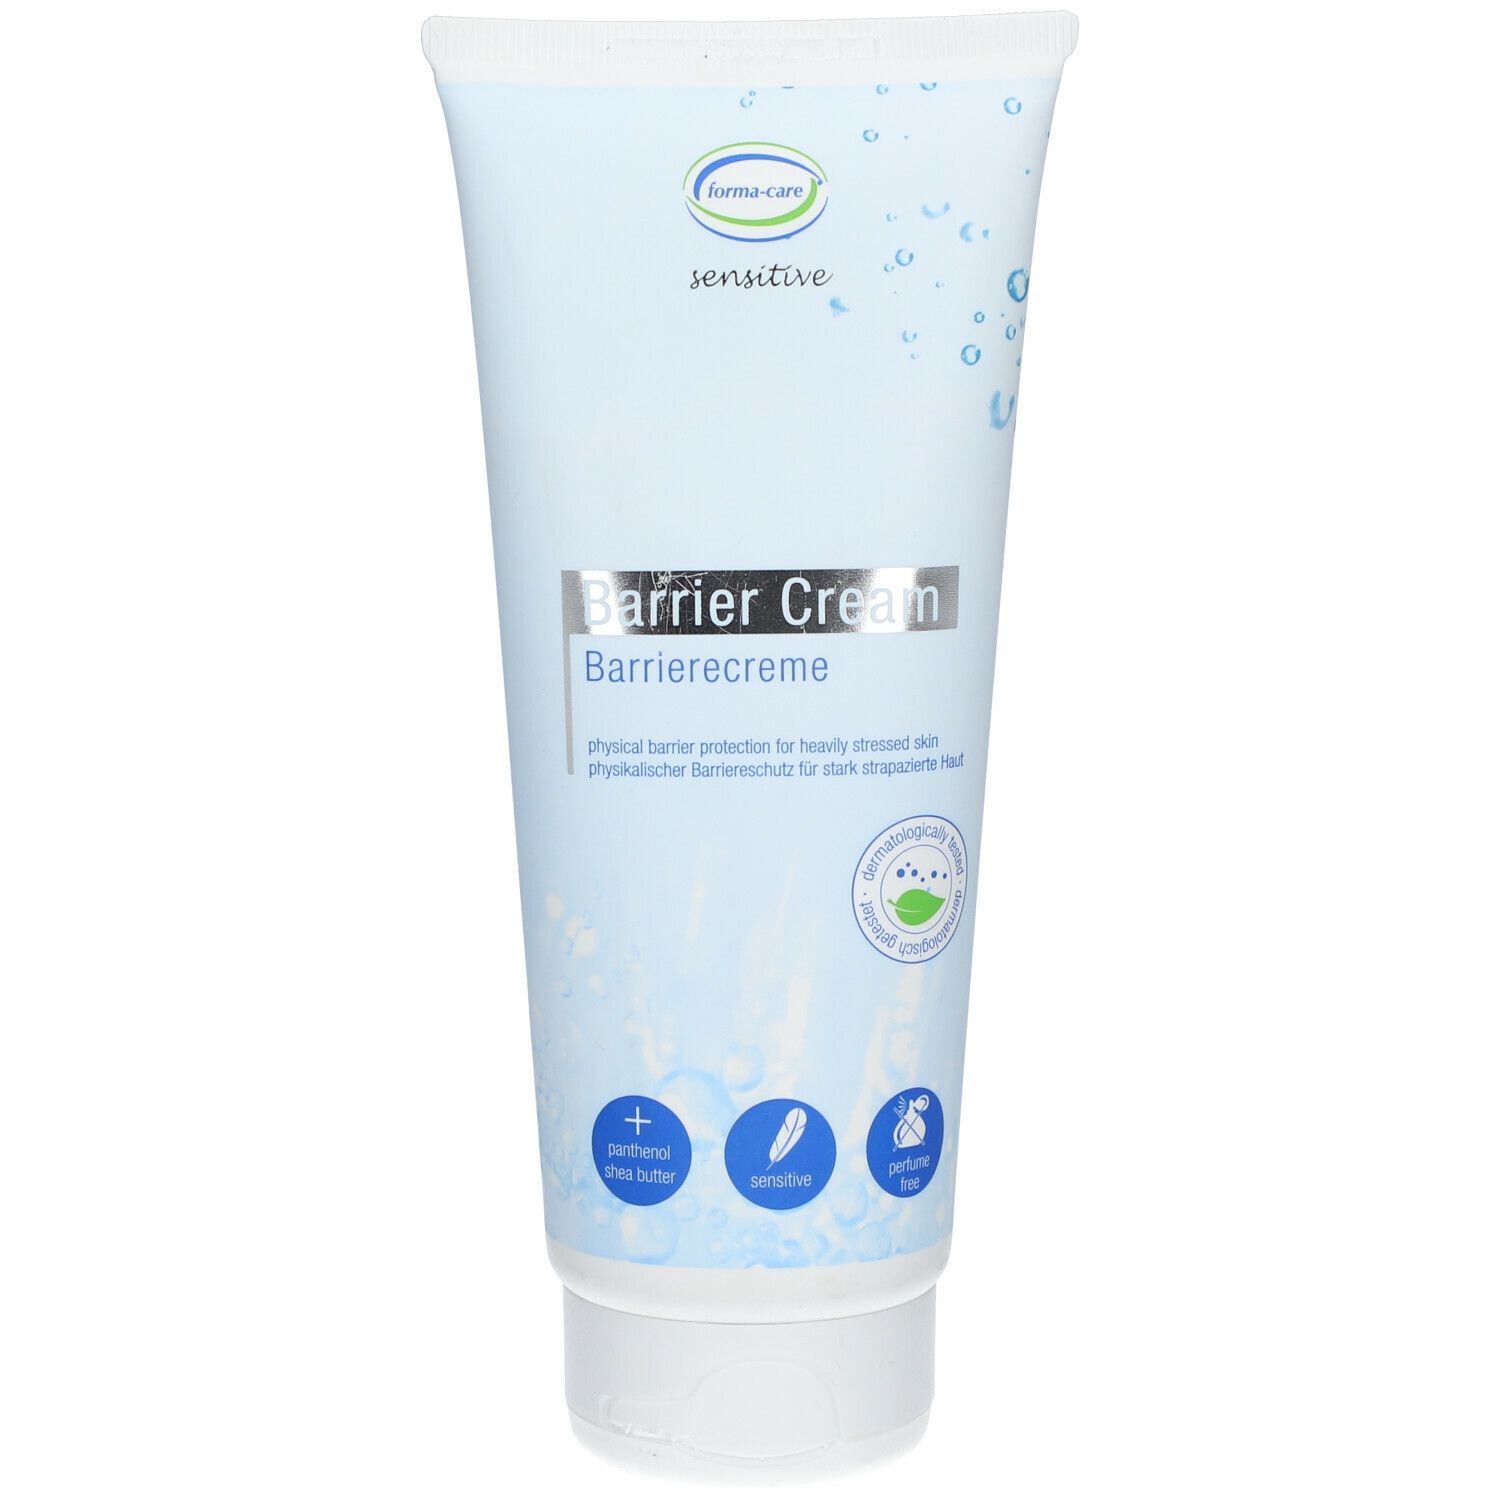 Image of forma-care Barrierecreme